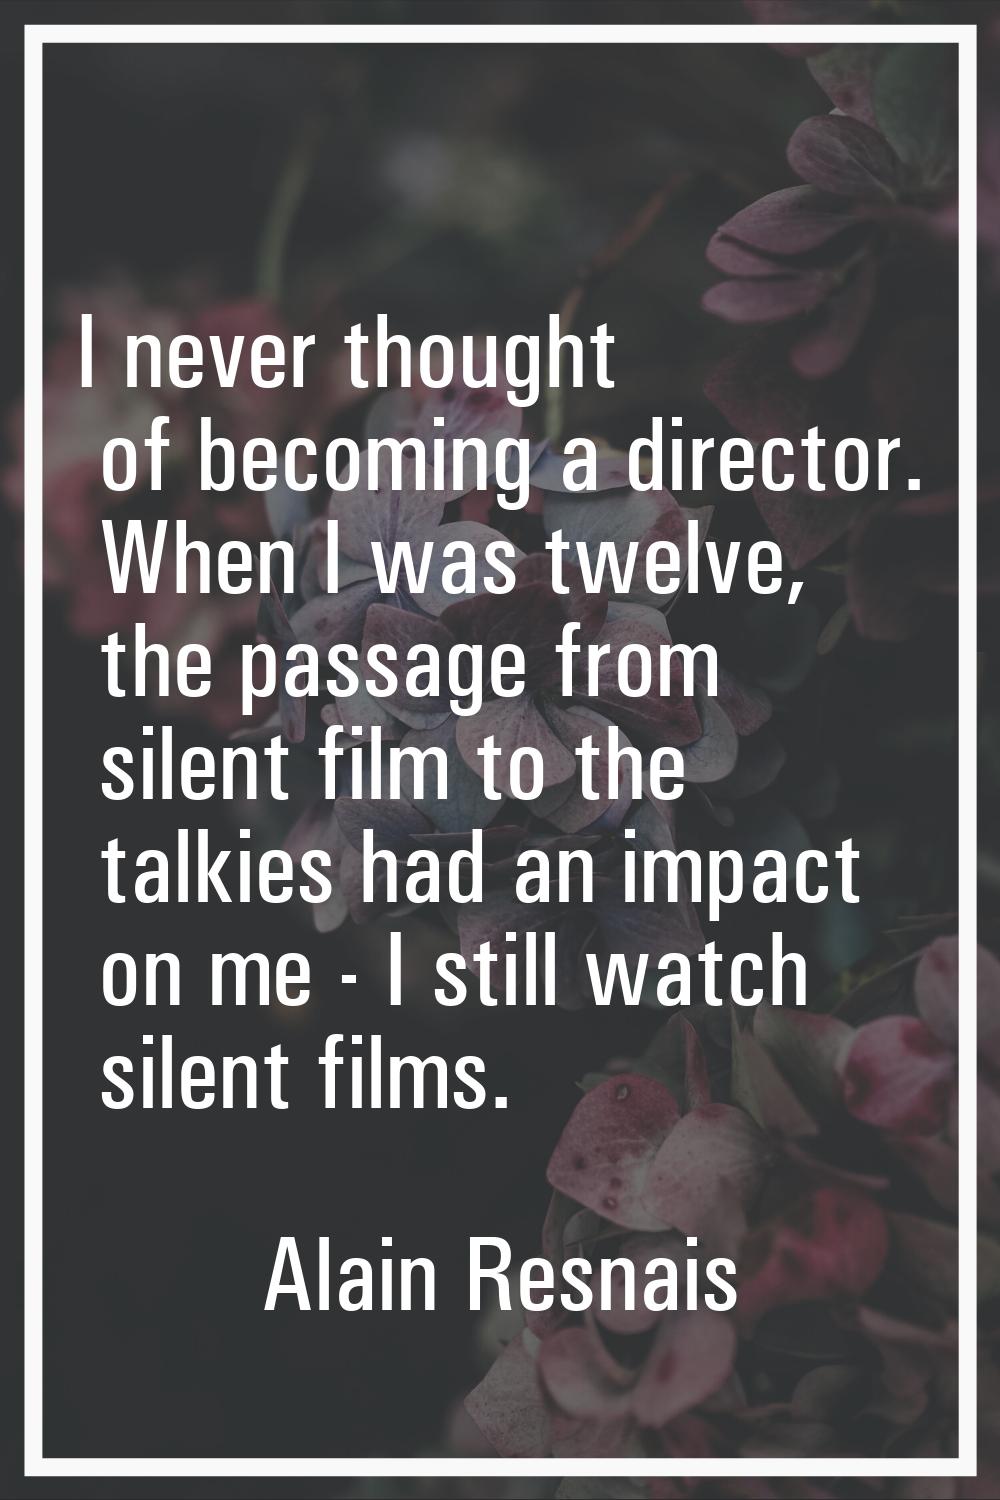 I never thought of becoming a director. When I was twelve, the passage from silent film to the talk